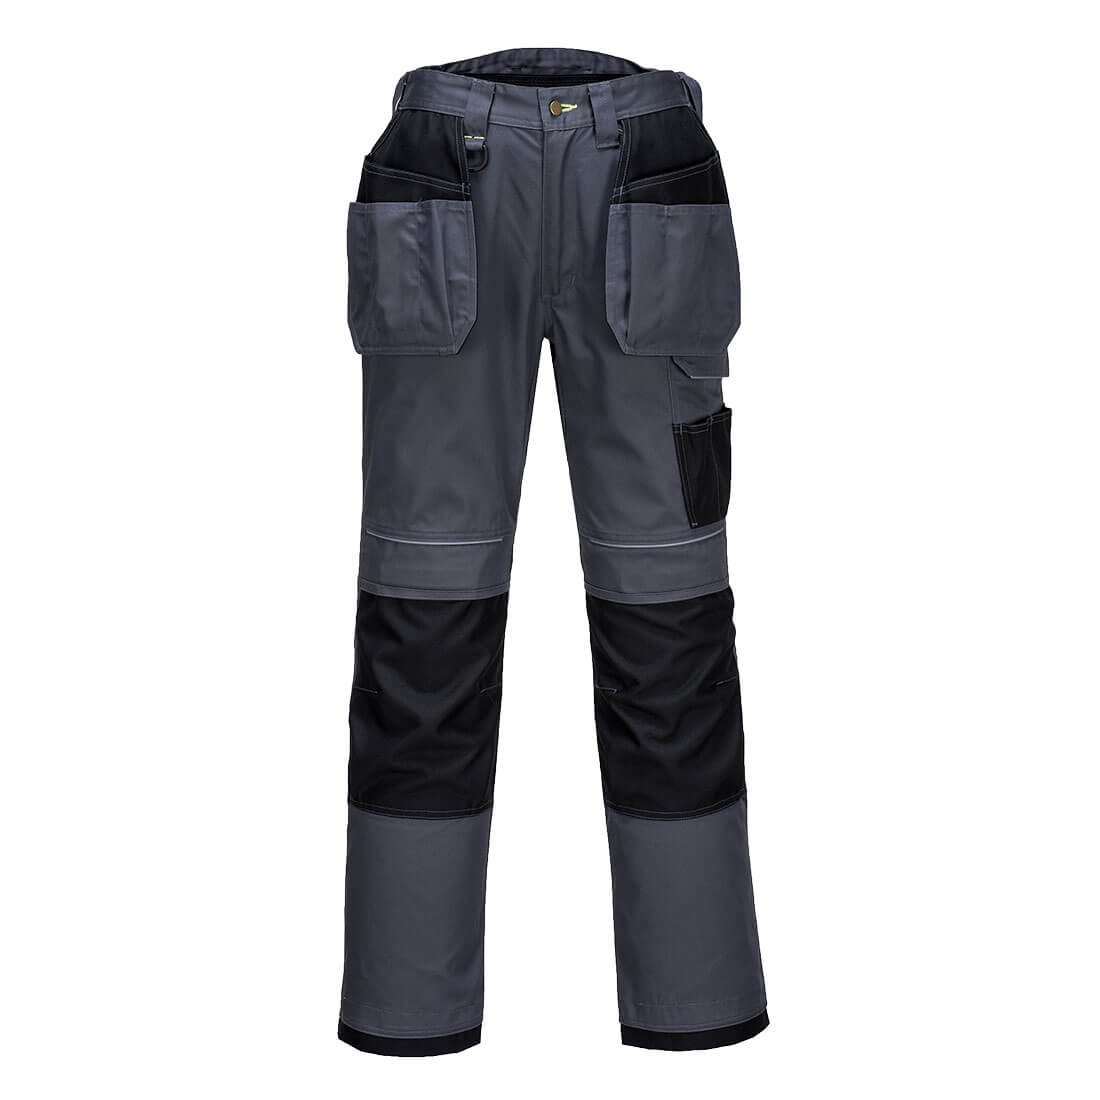 Photo of Pw3 Mens Urban Holster Work Trousers Grey / Black 38